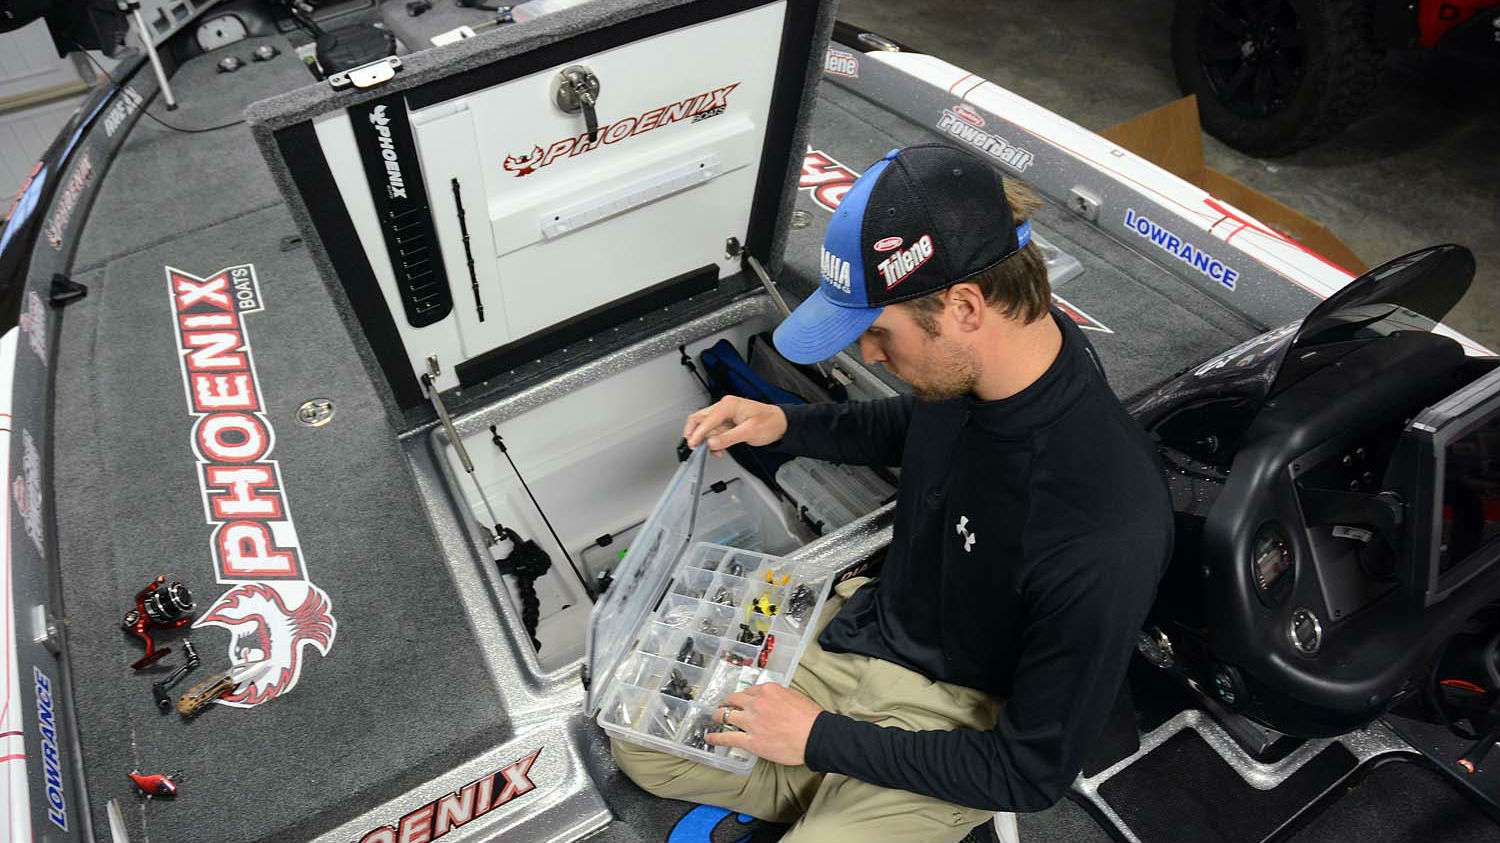 Lucas is back aboard the boat to prepare his tackle for the Classic. Preparing never ends but itâs easier when you are so organized like him. 